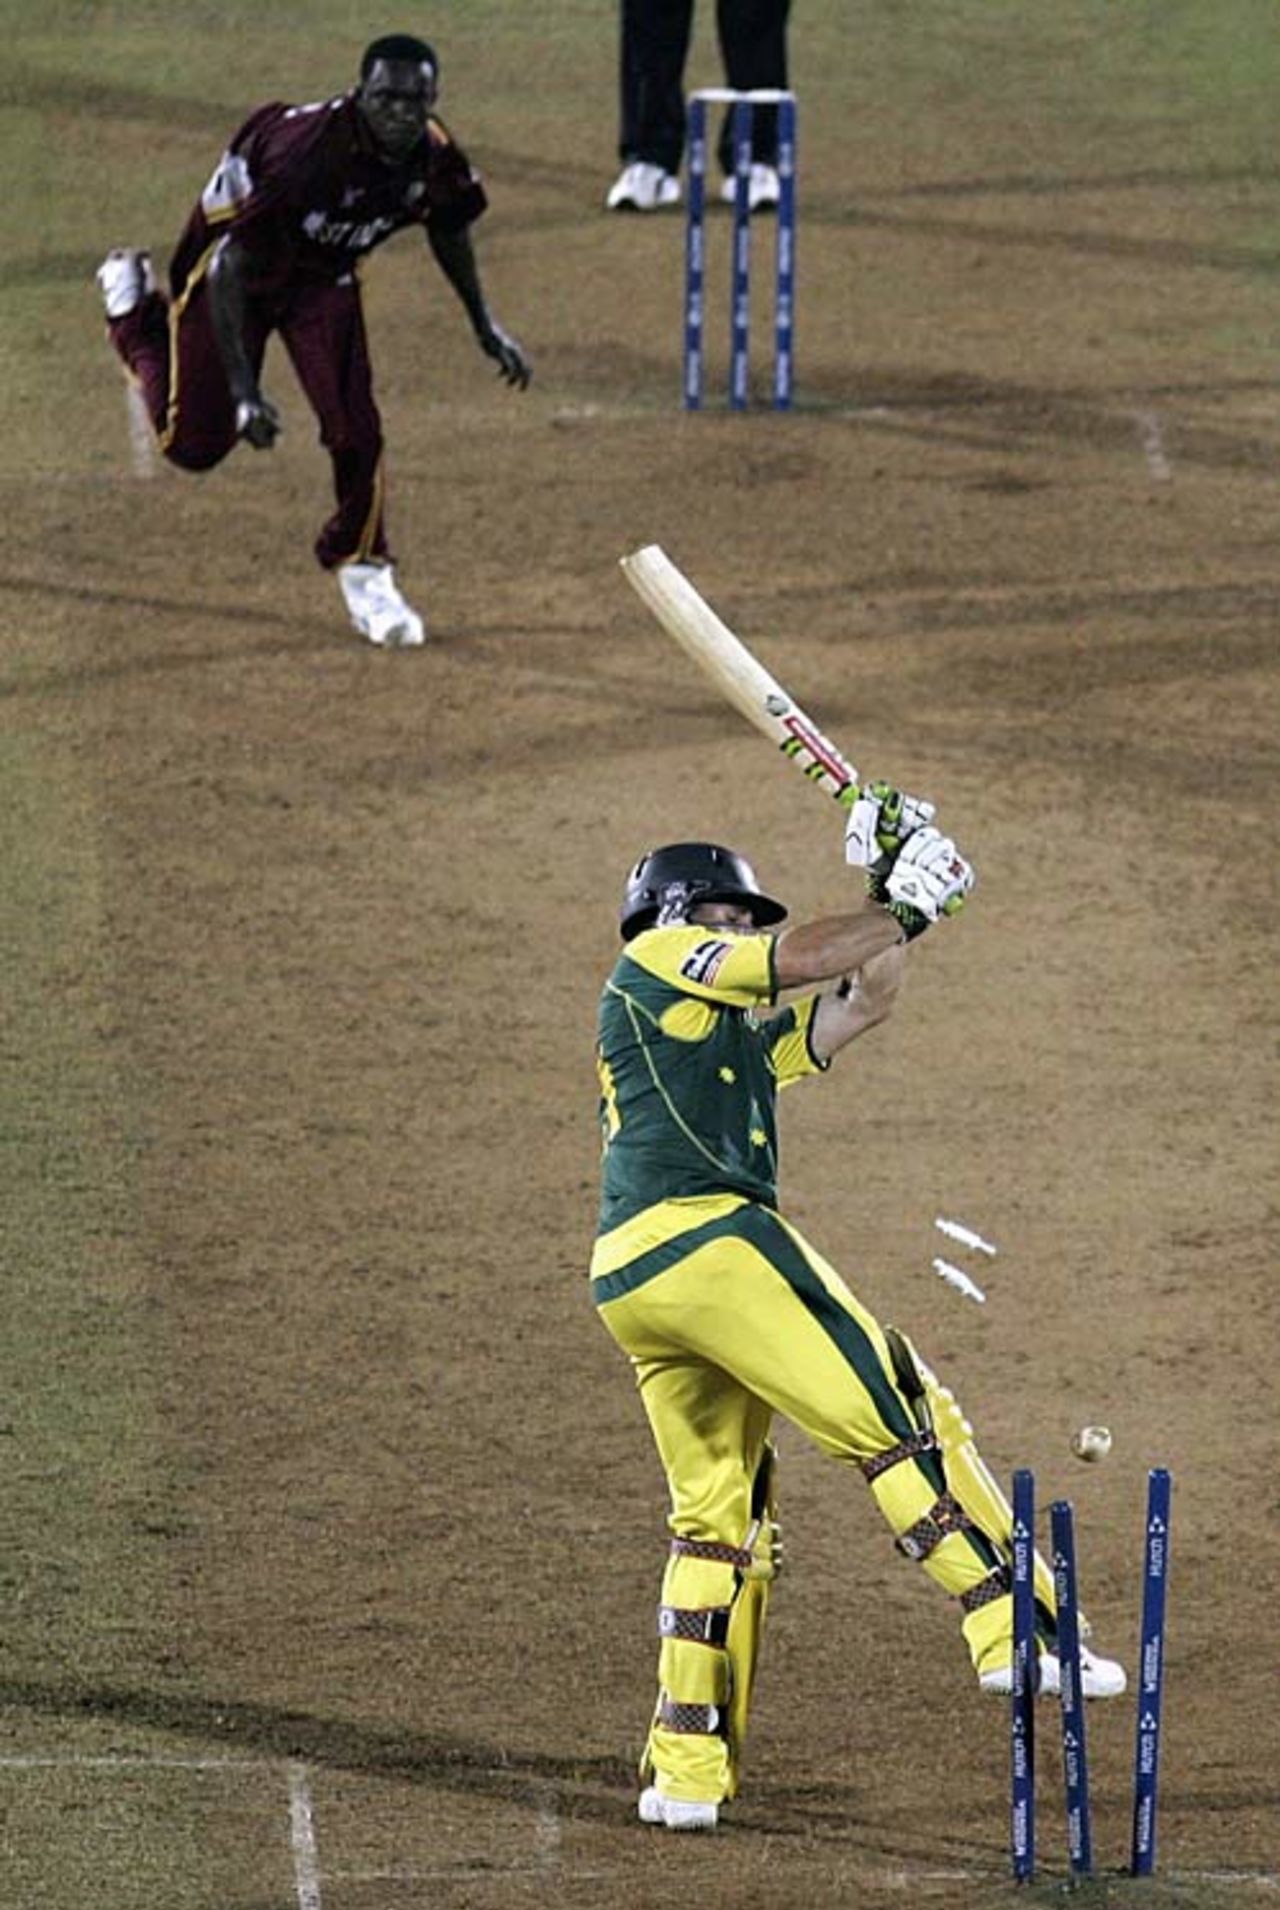 Brad Hogg is bowled by Jerome Taylor, Australia v West Indies, 4th match, Mumbai, October 18, 2006